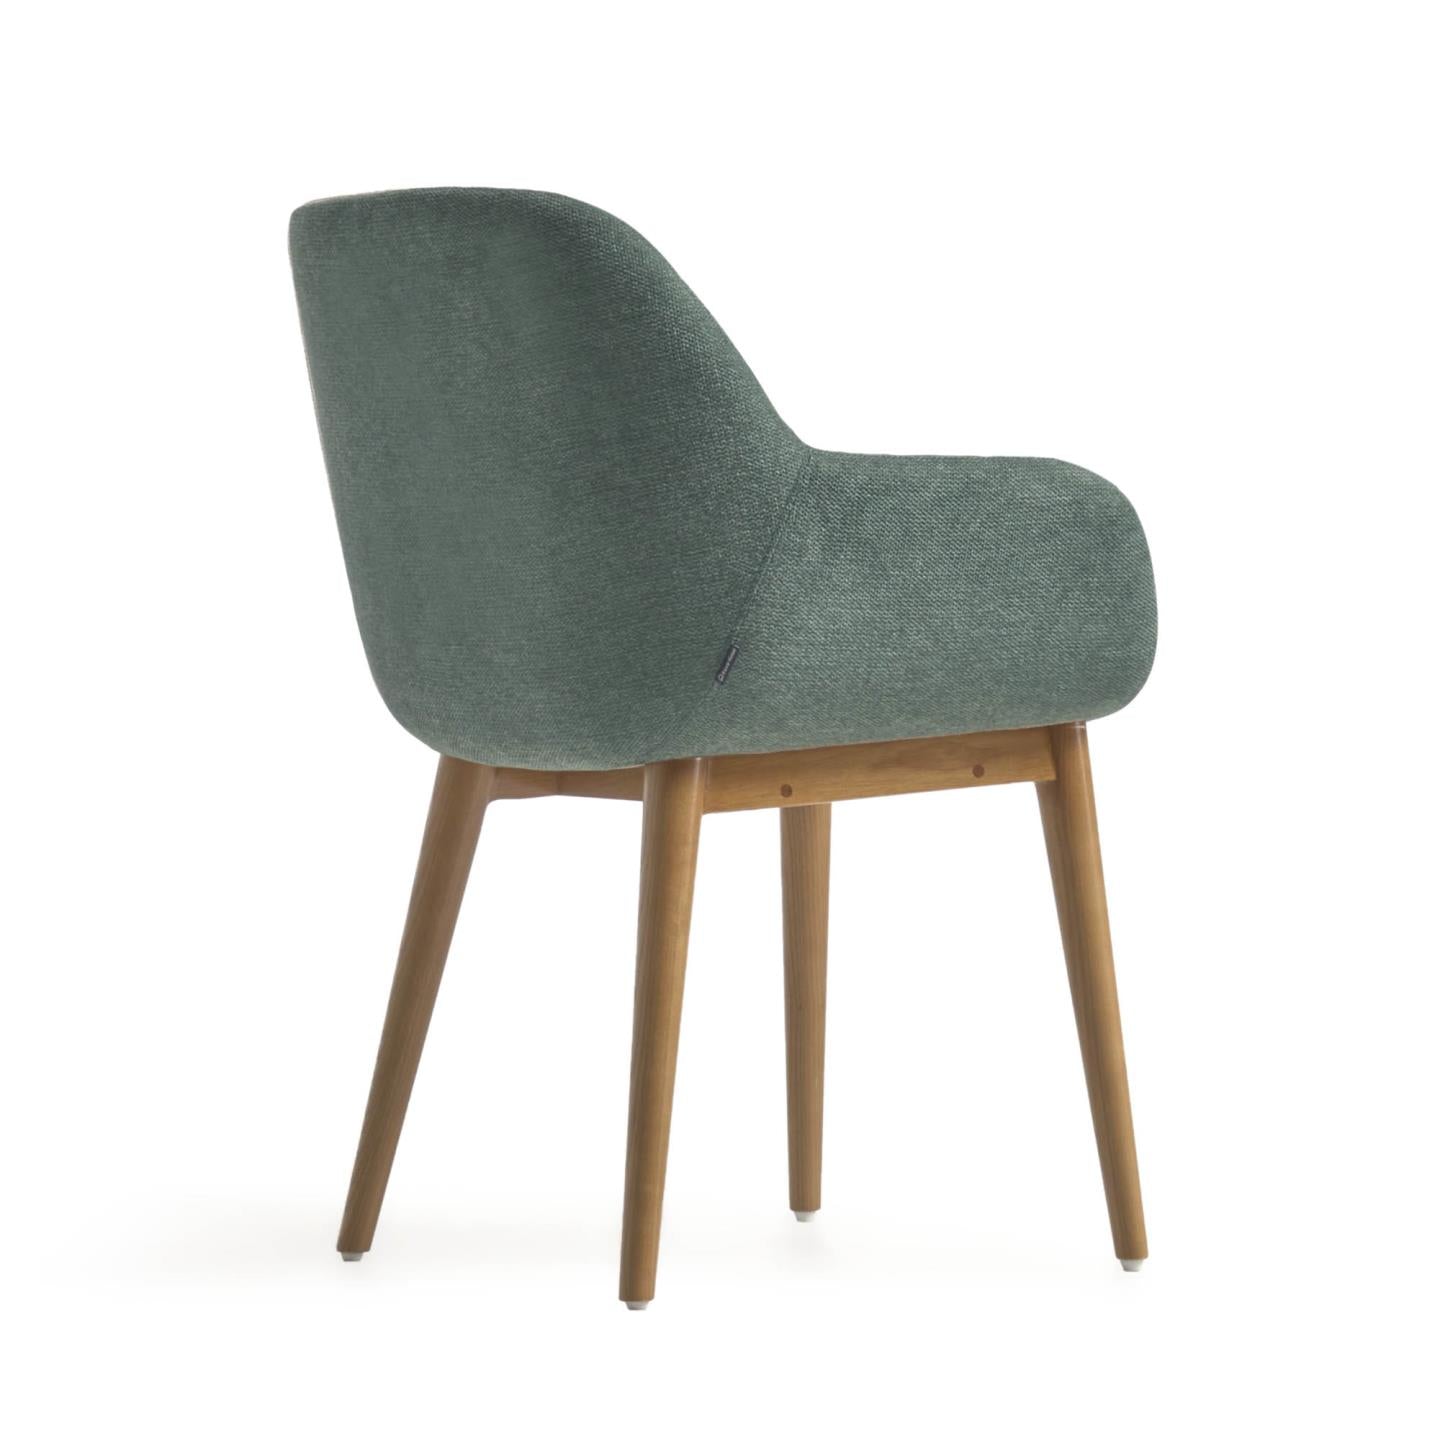 Konna chair in green with solid ash wood legs in a dark finish